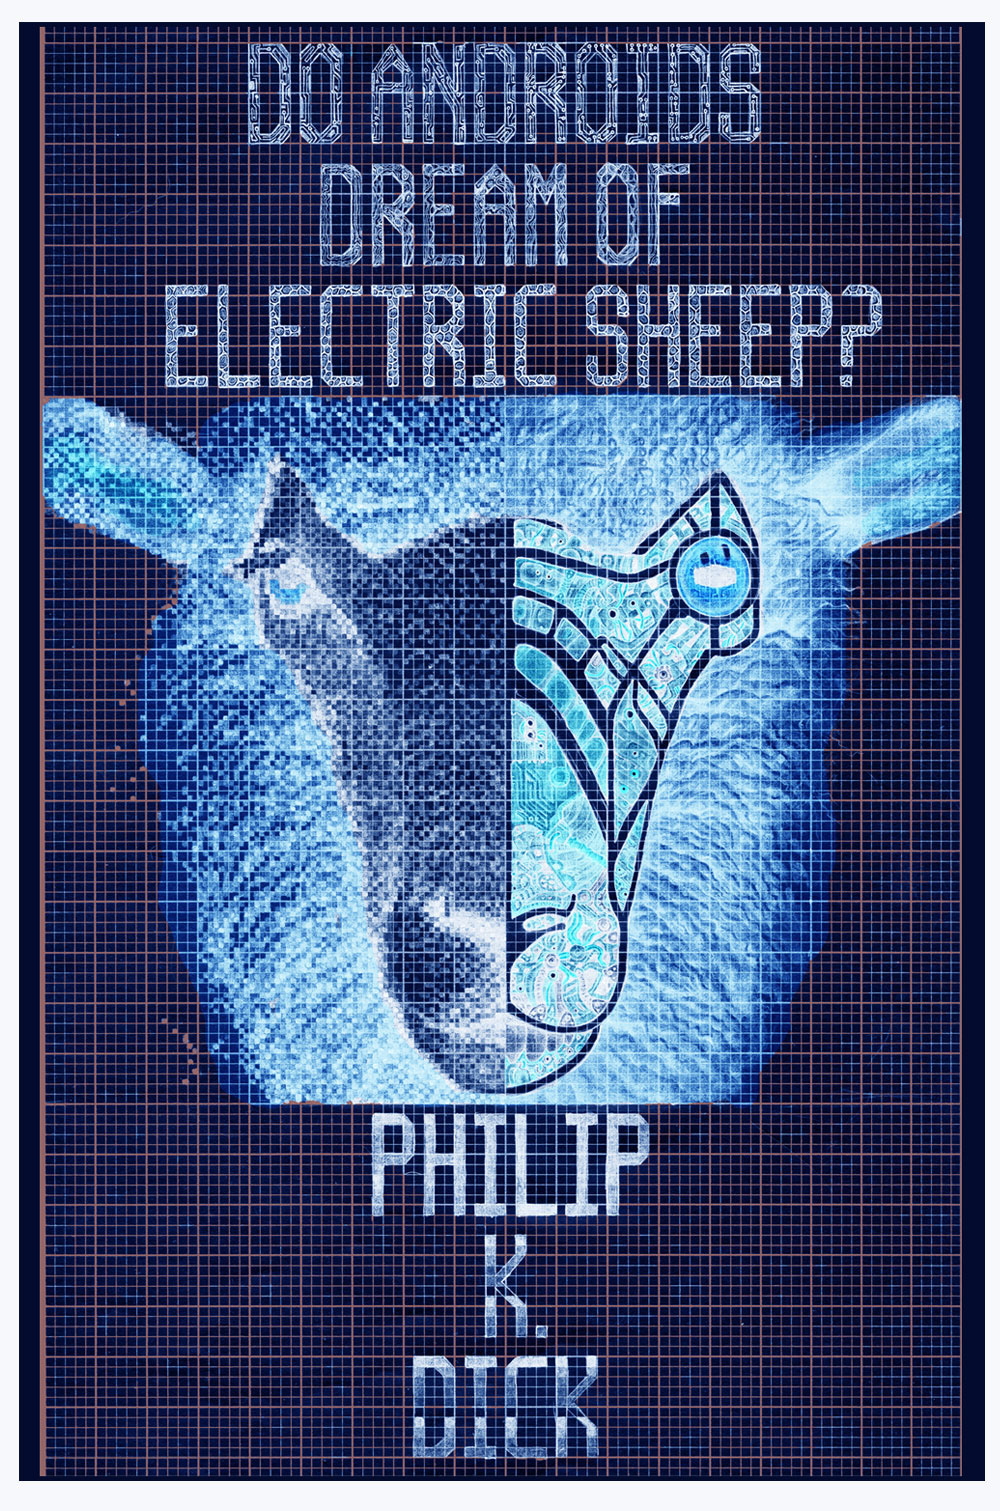 Philip K. Dick Do Androids dream of Electric Sheep book cover ILLUSTRATION 